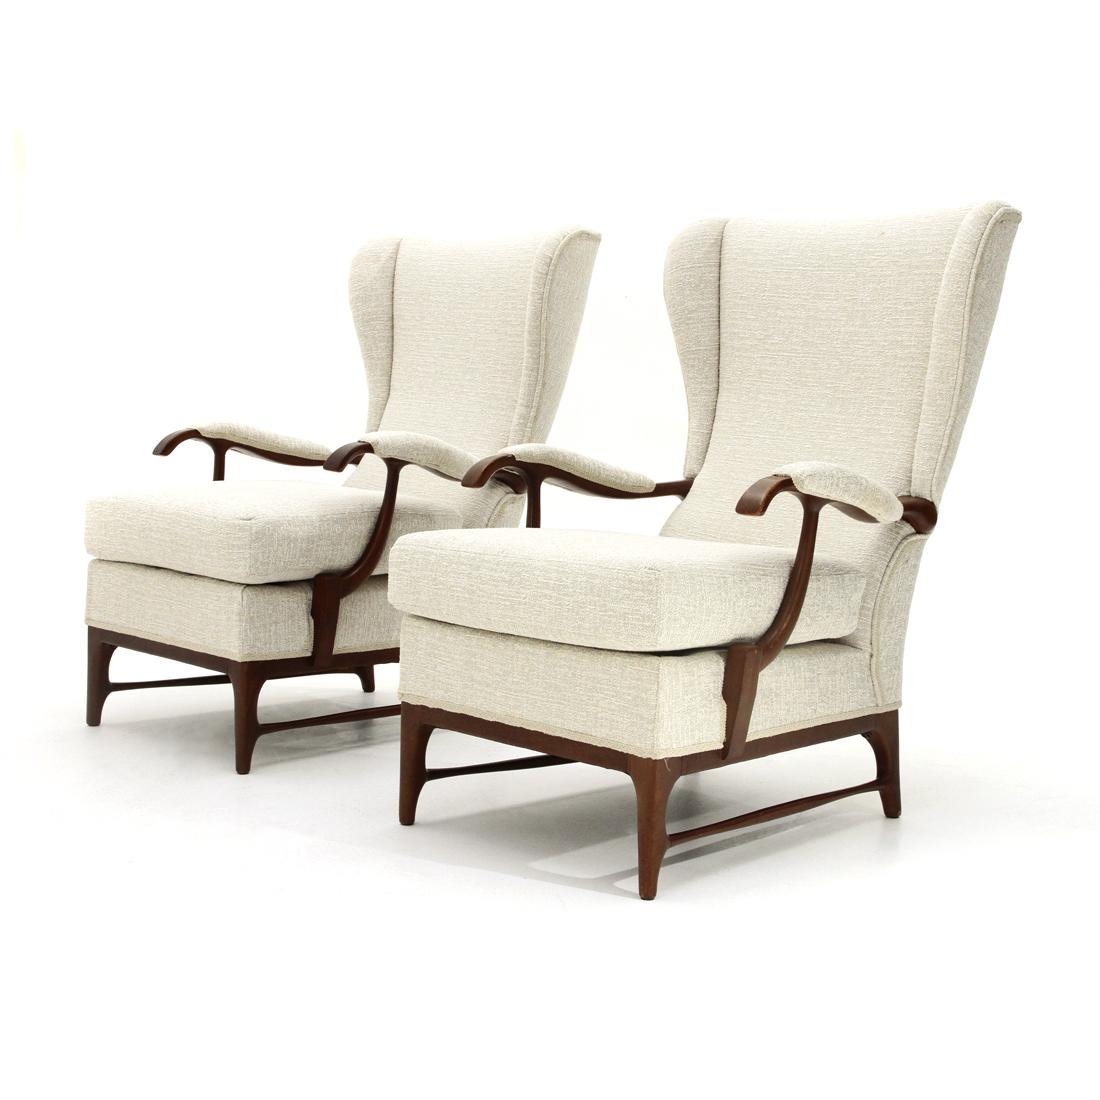 Italian Pair of armchairs in ivory white fabric by Framar, 1950s For Sale